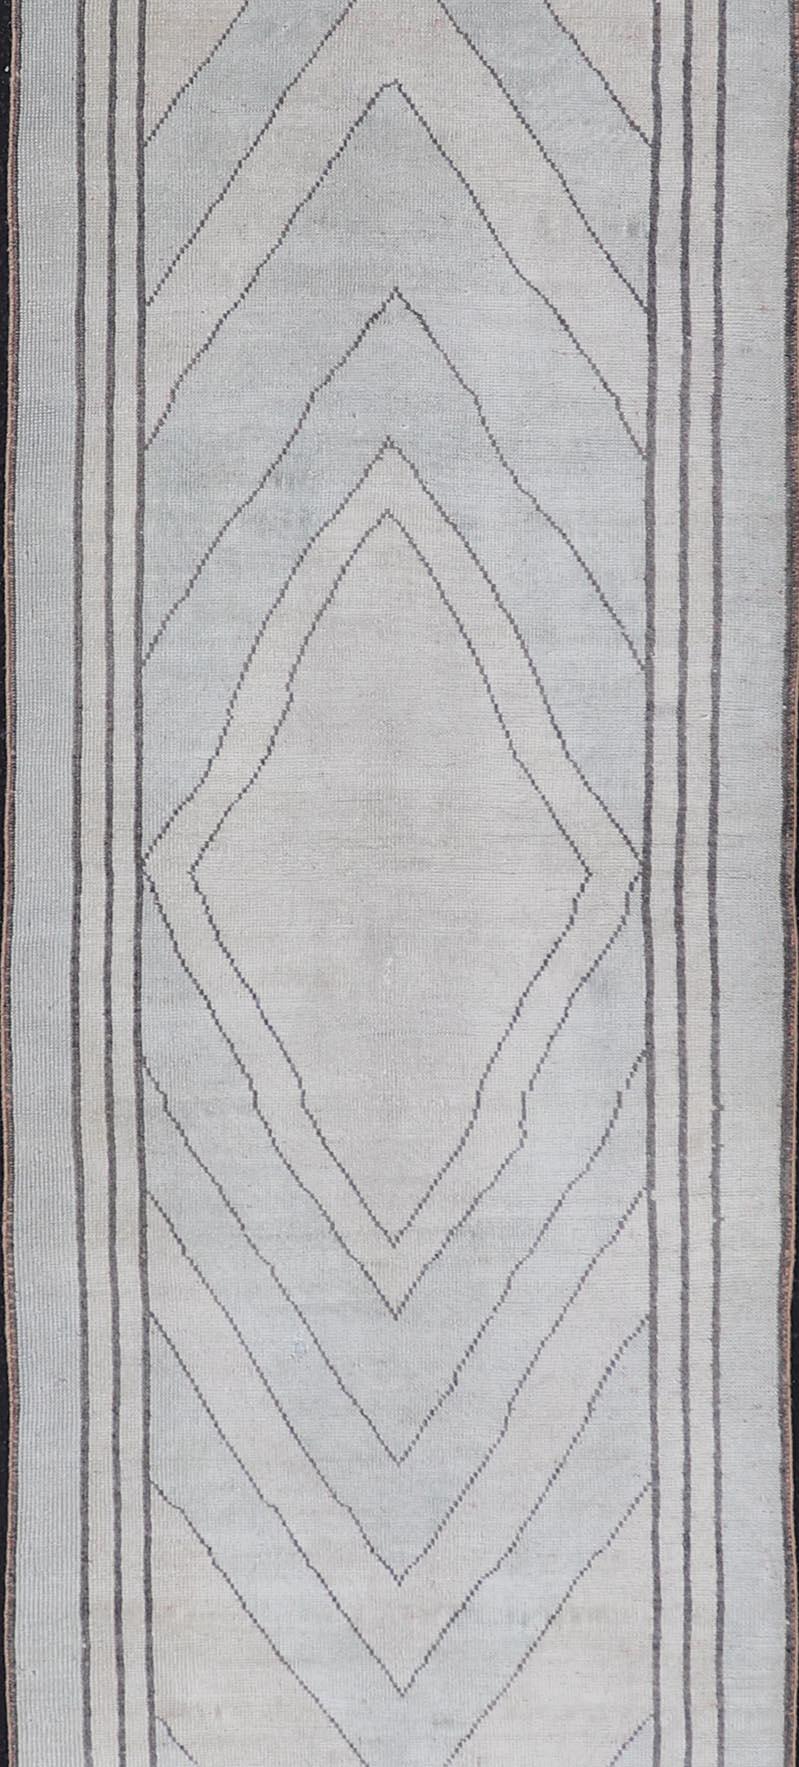 Vintage Oushak runner with modern design with light blue, taupe, brown and cream in a neutral color palette and medallion design, Keivan Woven Arts rug TU-MTU-4952, country of origin / type: Turkey/ Oushak 1960's

Measures: 2'9 x 13'0.